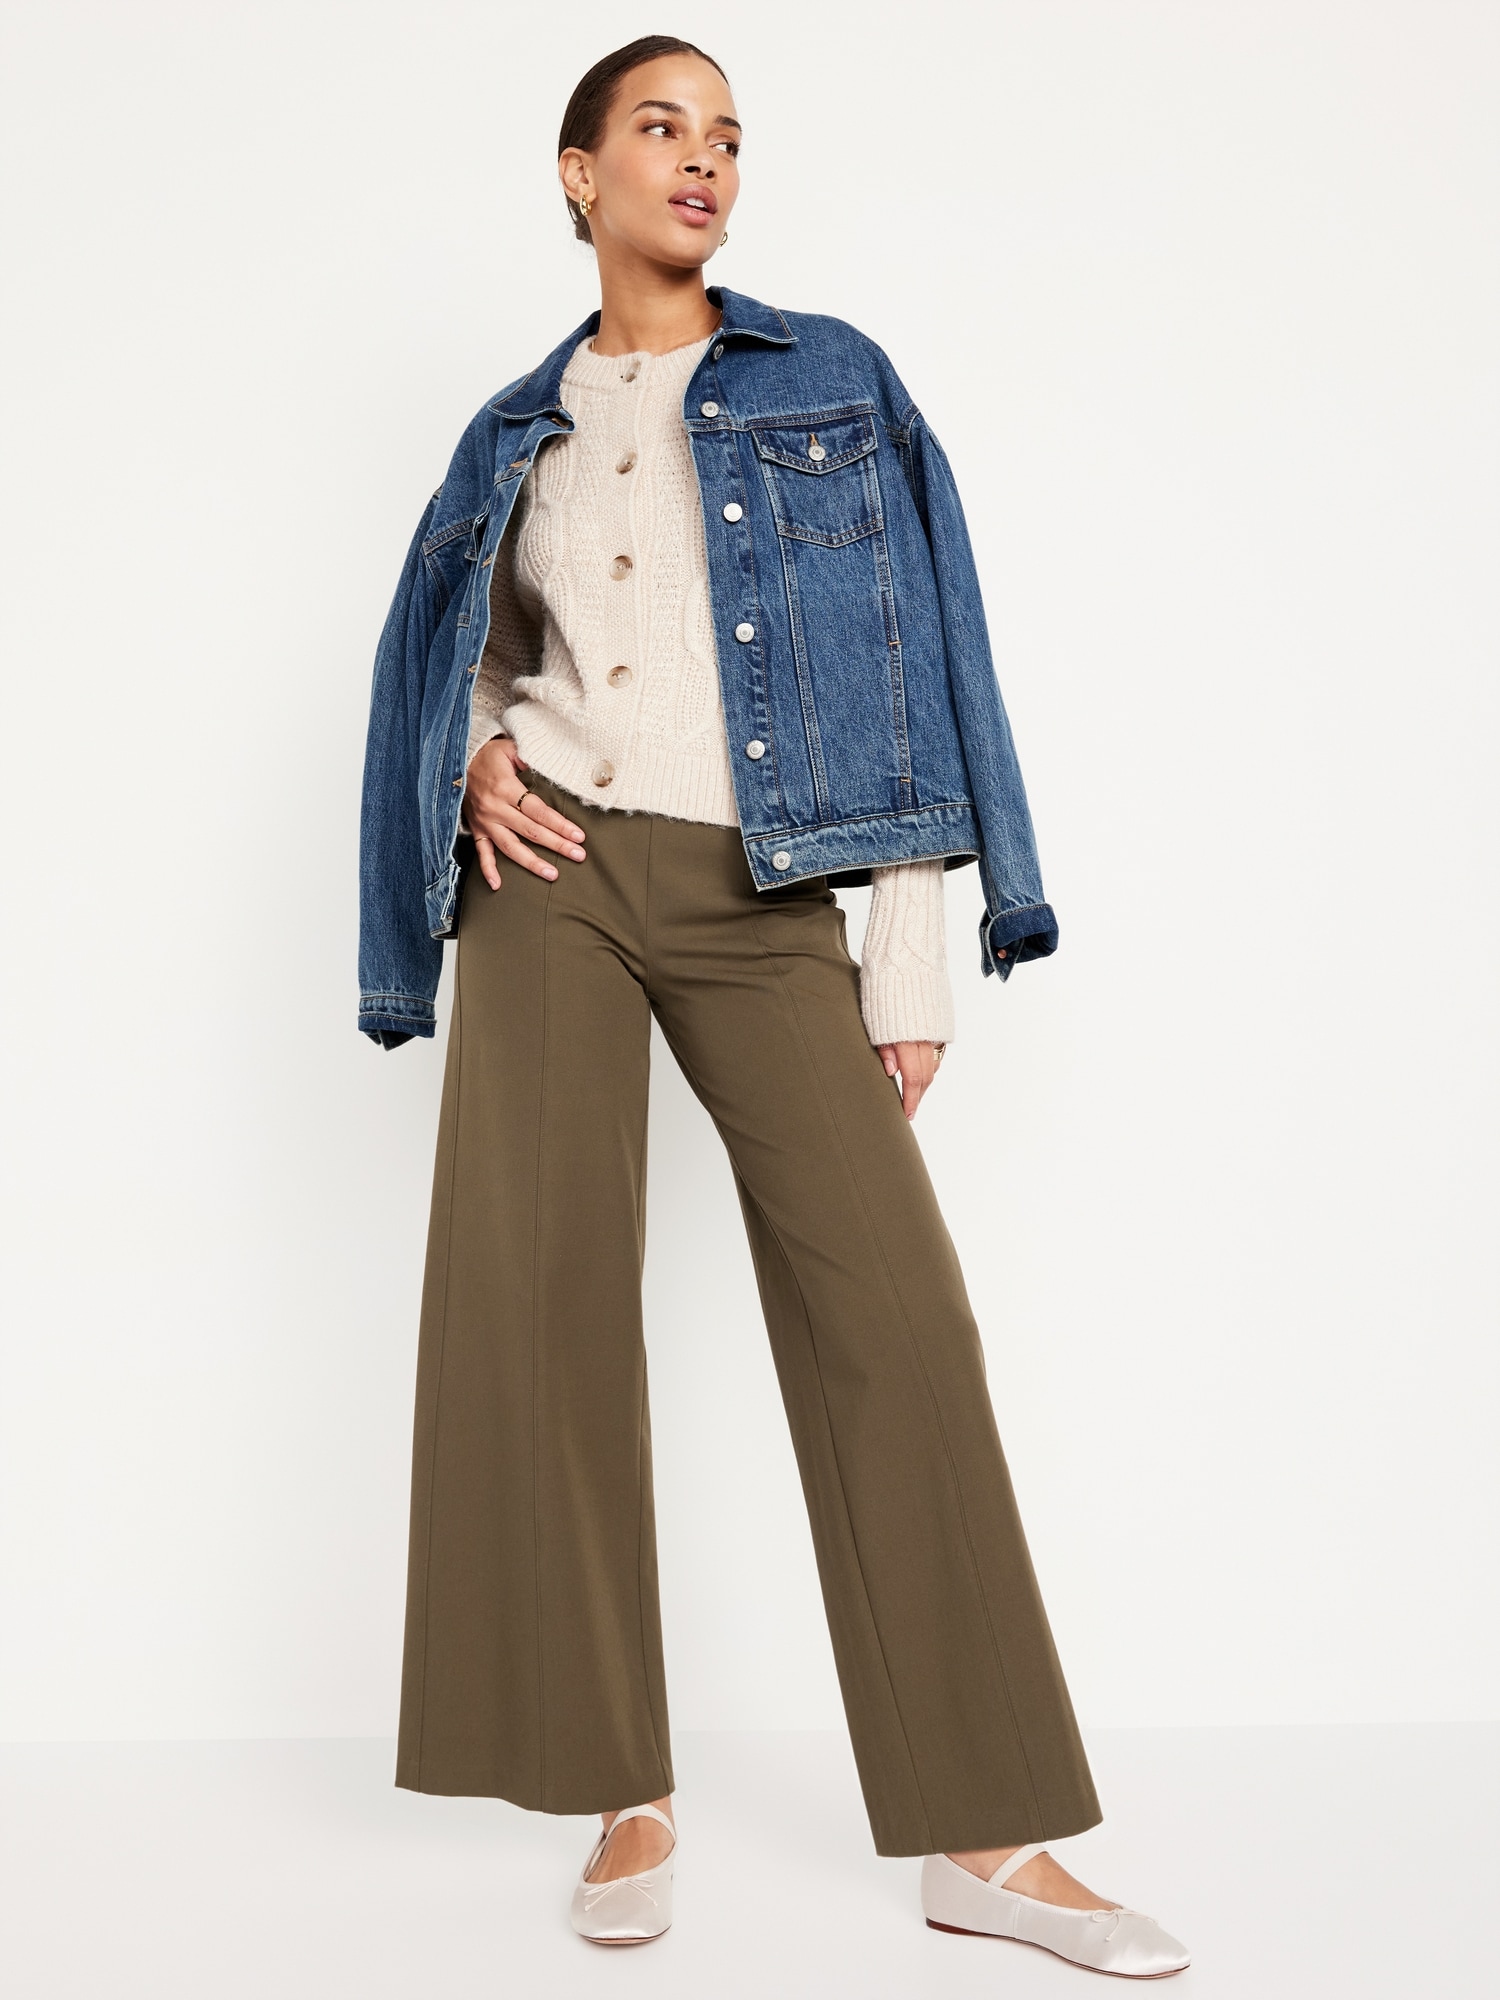 ✨OLD NAVY✨ Wide leg pants that can literally be worn with any top! Dre, pants